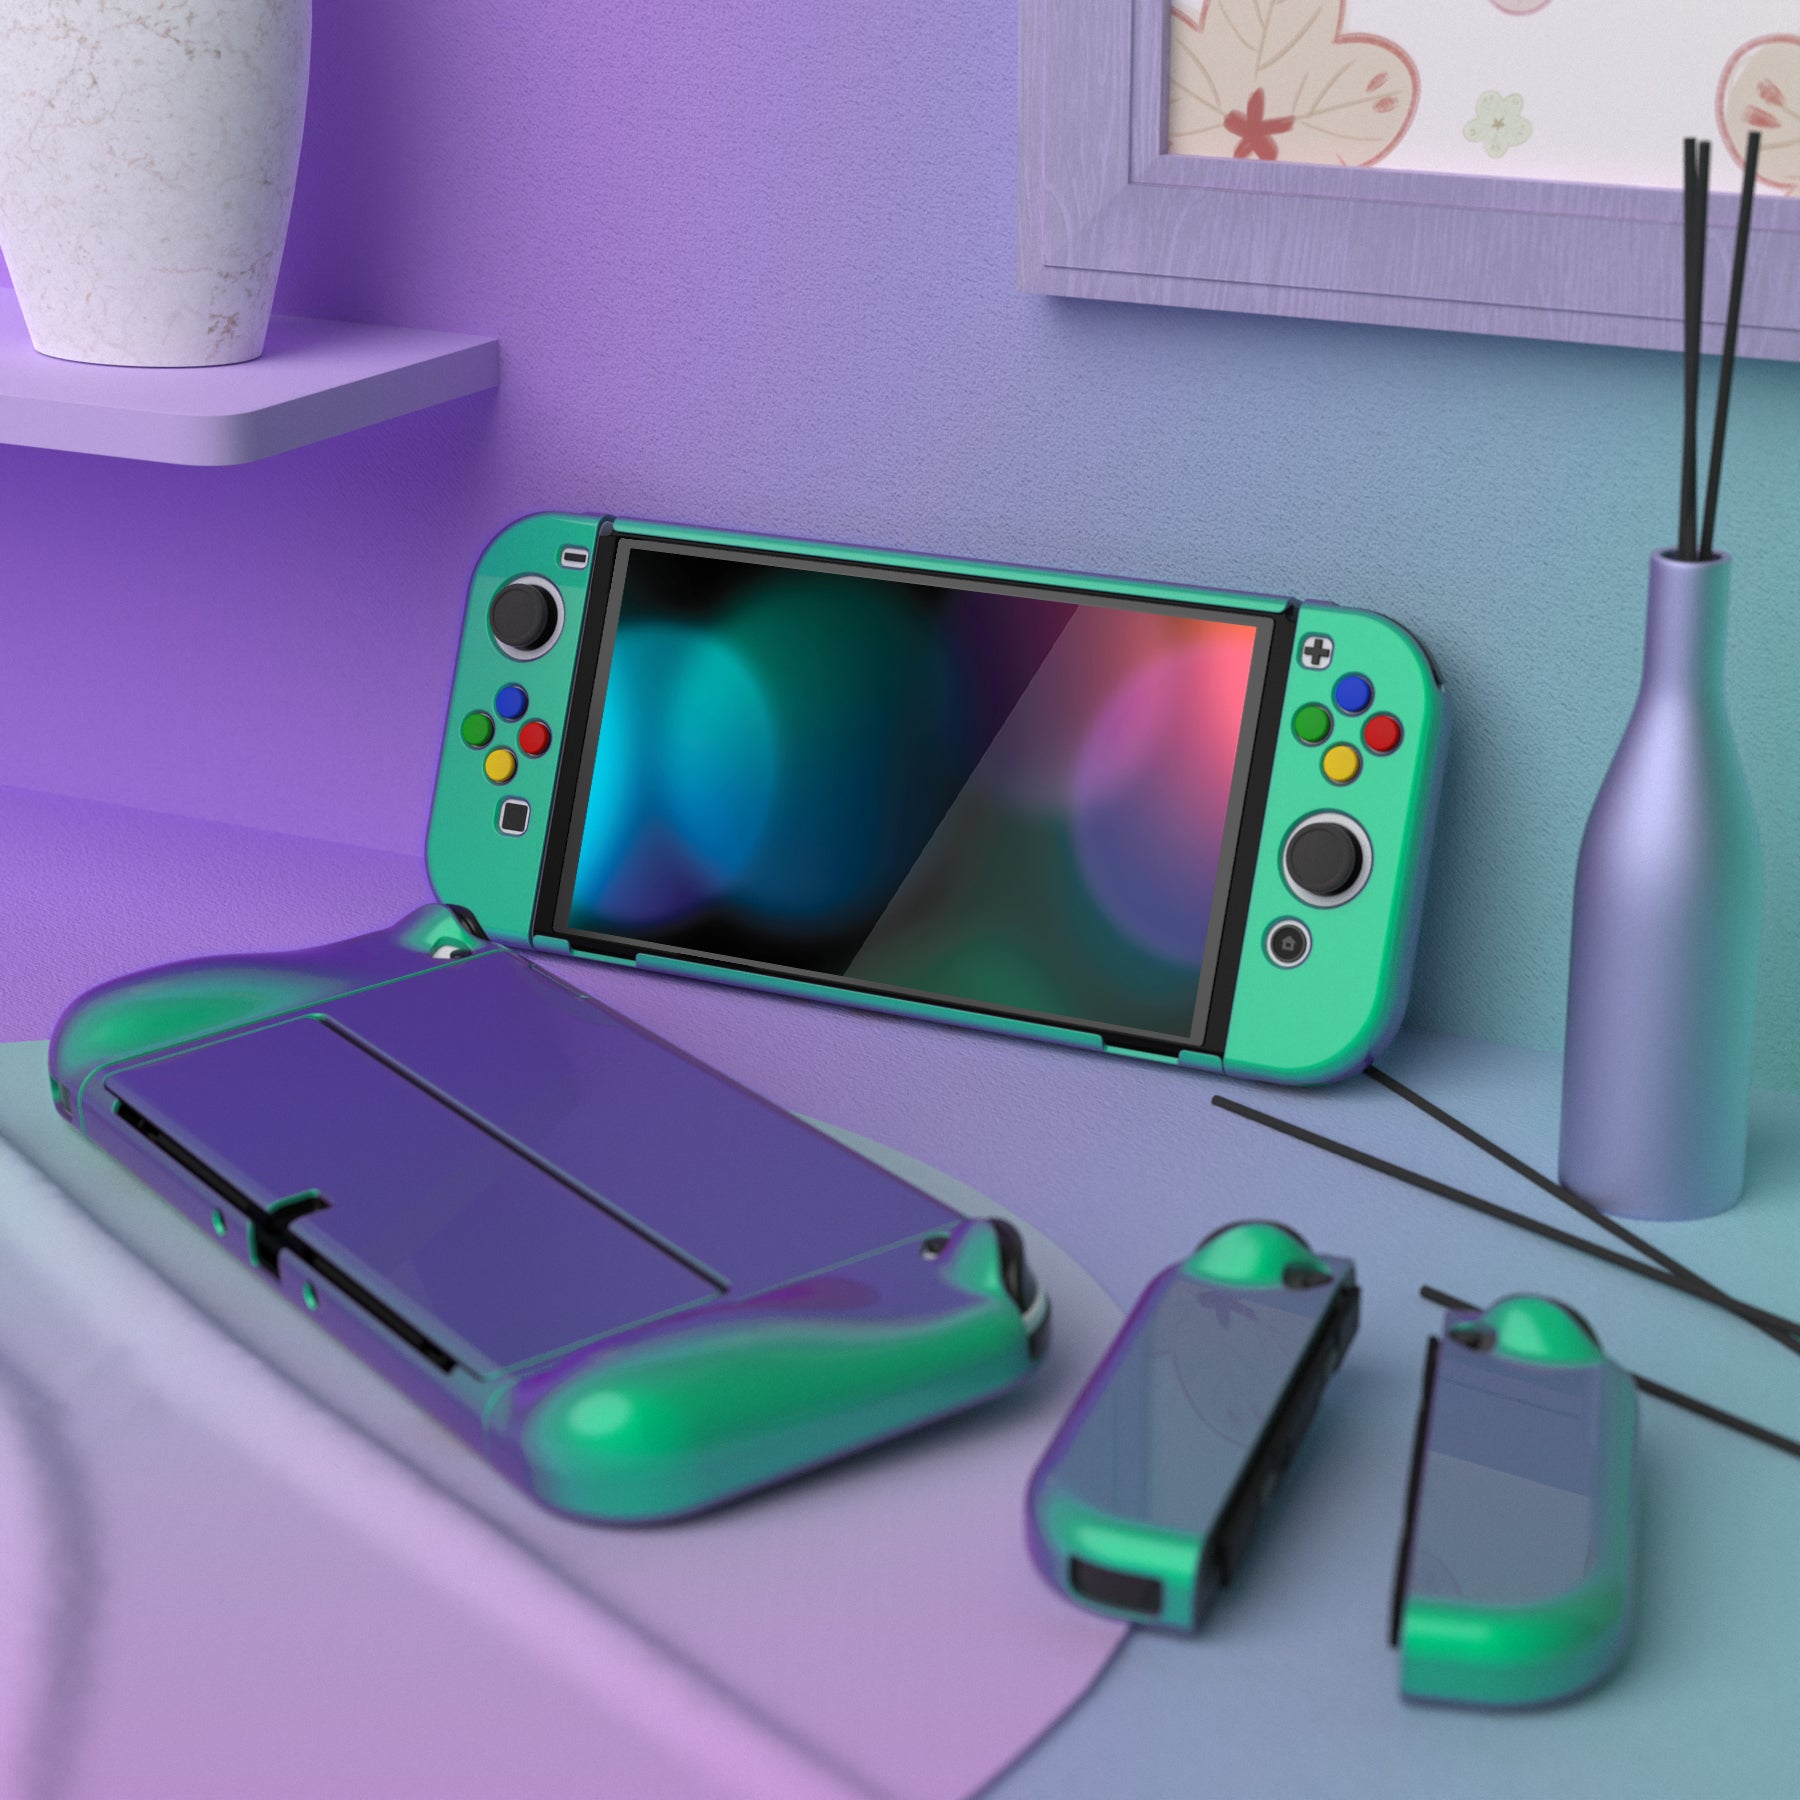 PlayVital AlterGrips Glossy Protective Slim Case for Nintendo Switch OLED, Ergonomic Grip Cover for Joycon, Dockable Hard Shell for Switch OLED with Thumb Grip Caps & Button Caps - Chameleon Green Purple - JSOYP3002 playvital